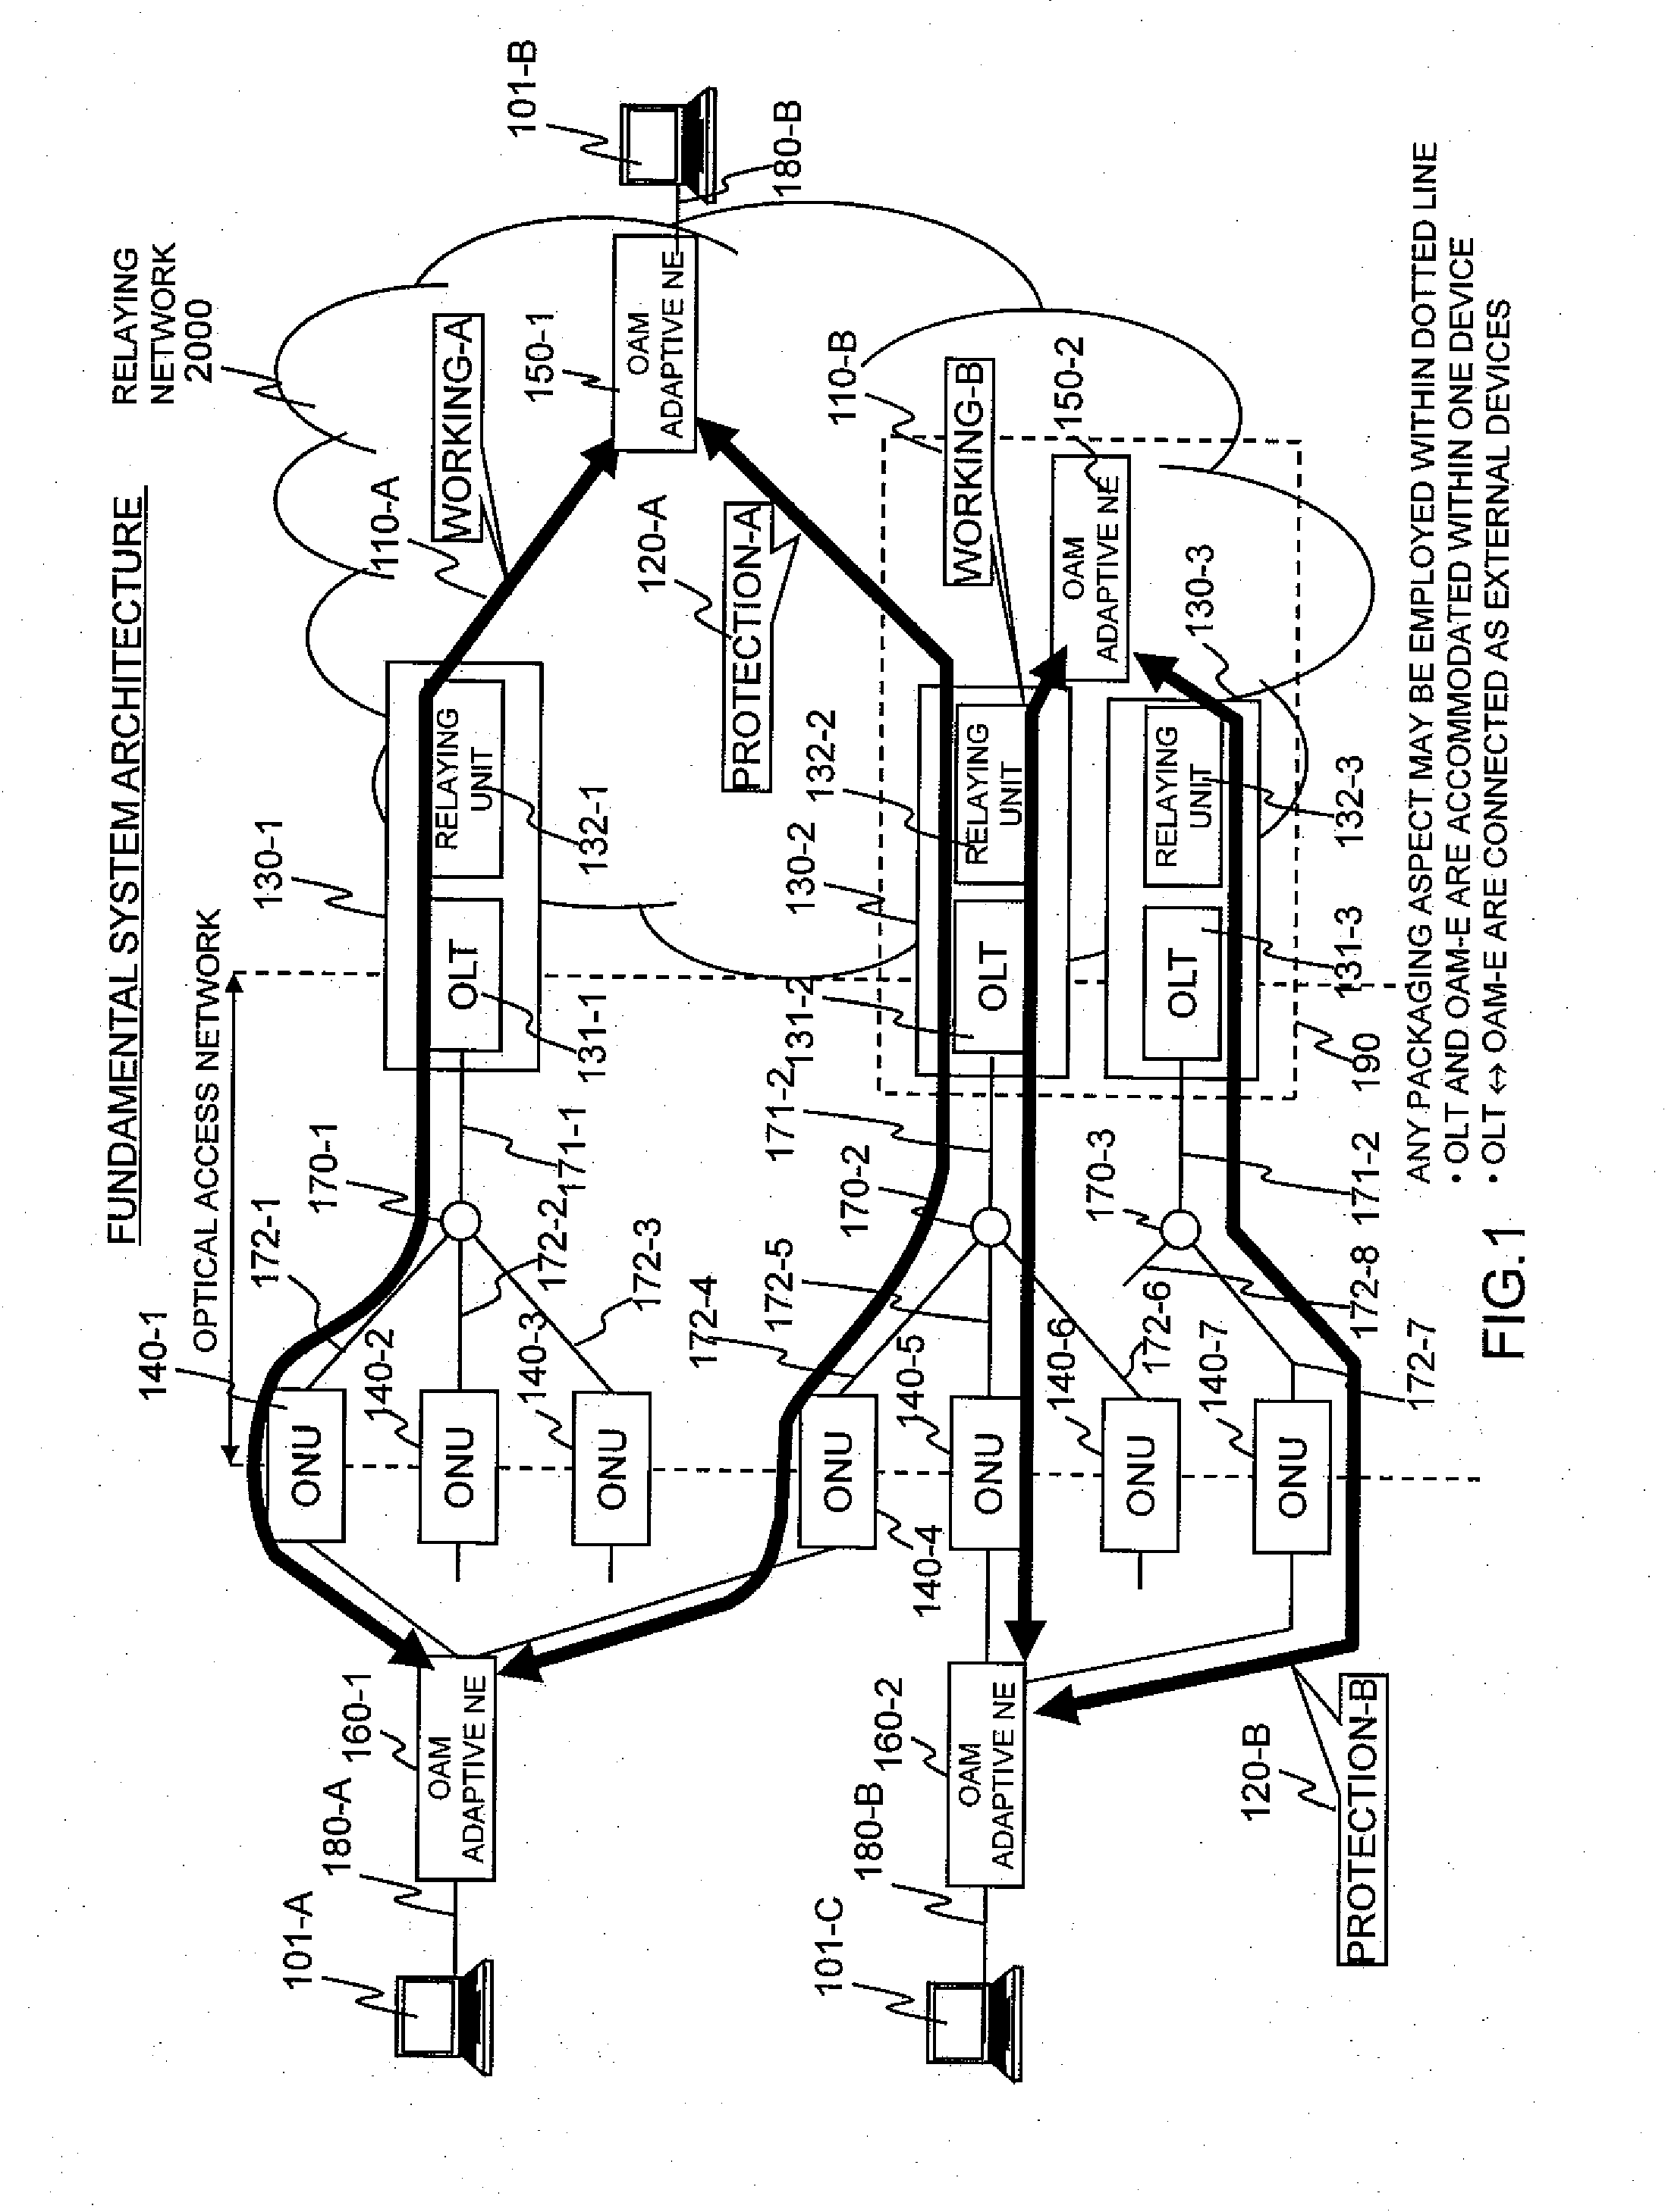 Communication System and Communication Apparatus